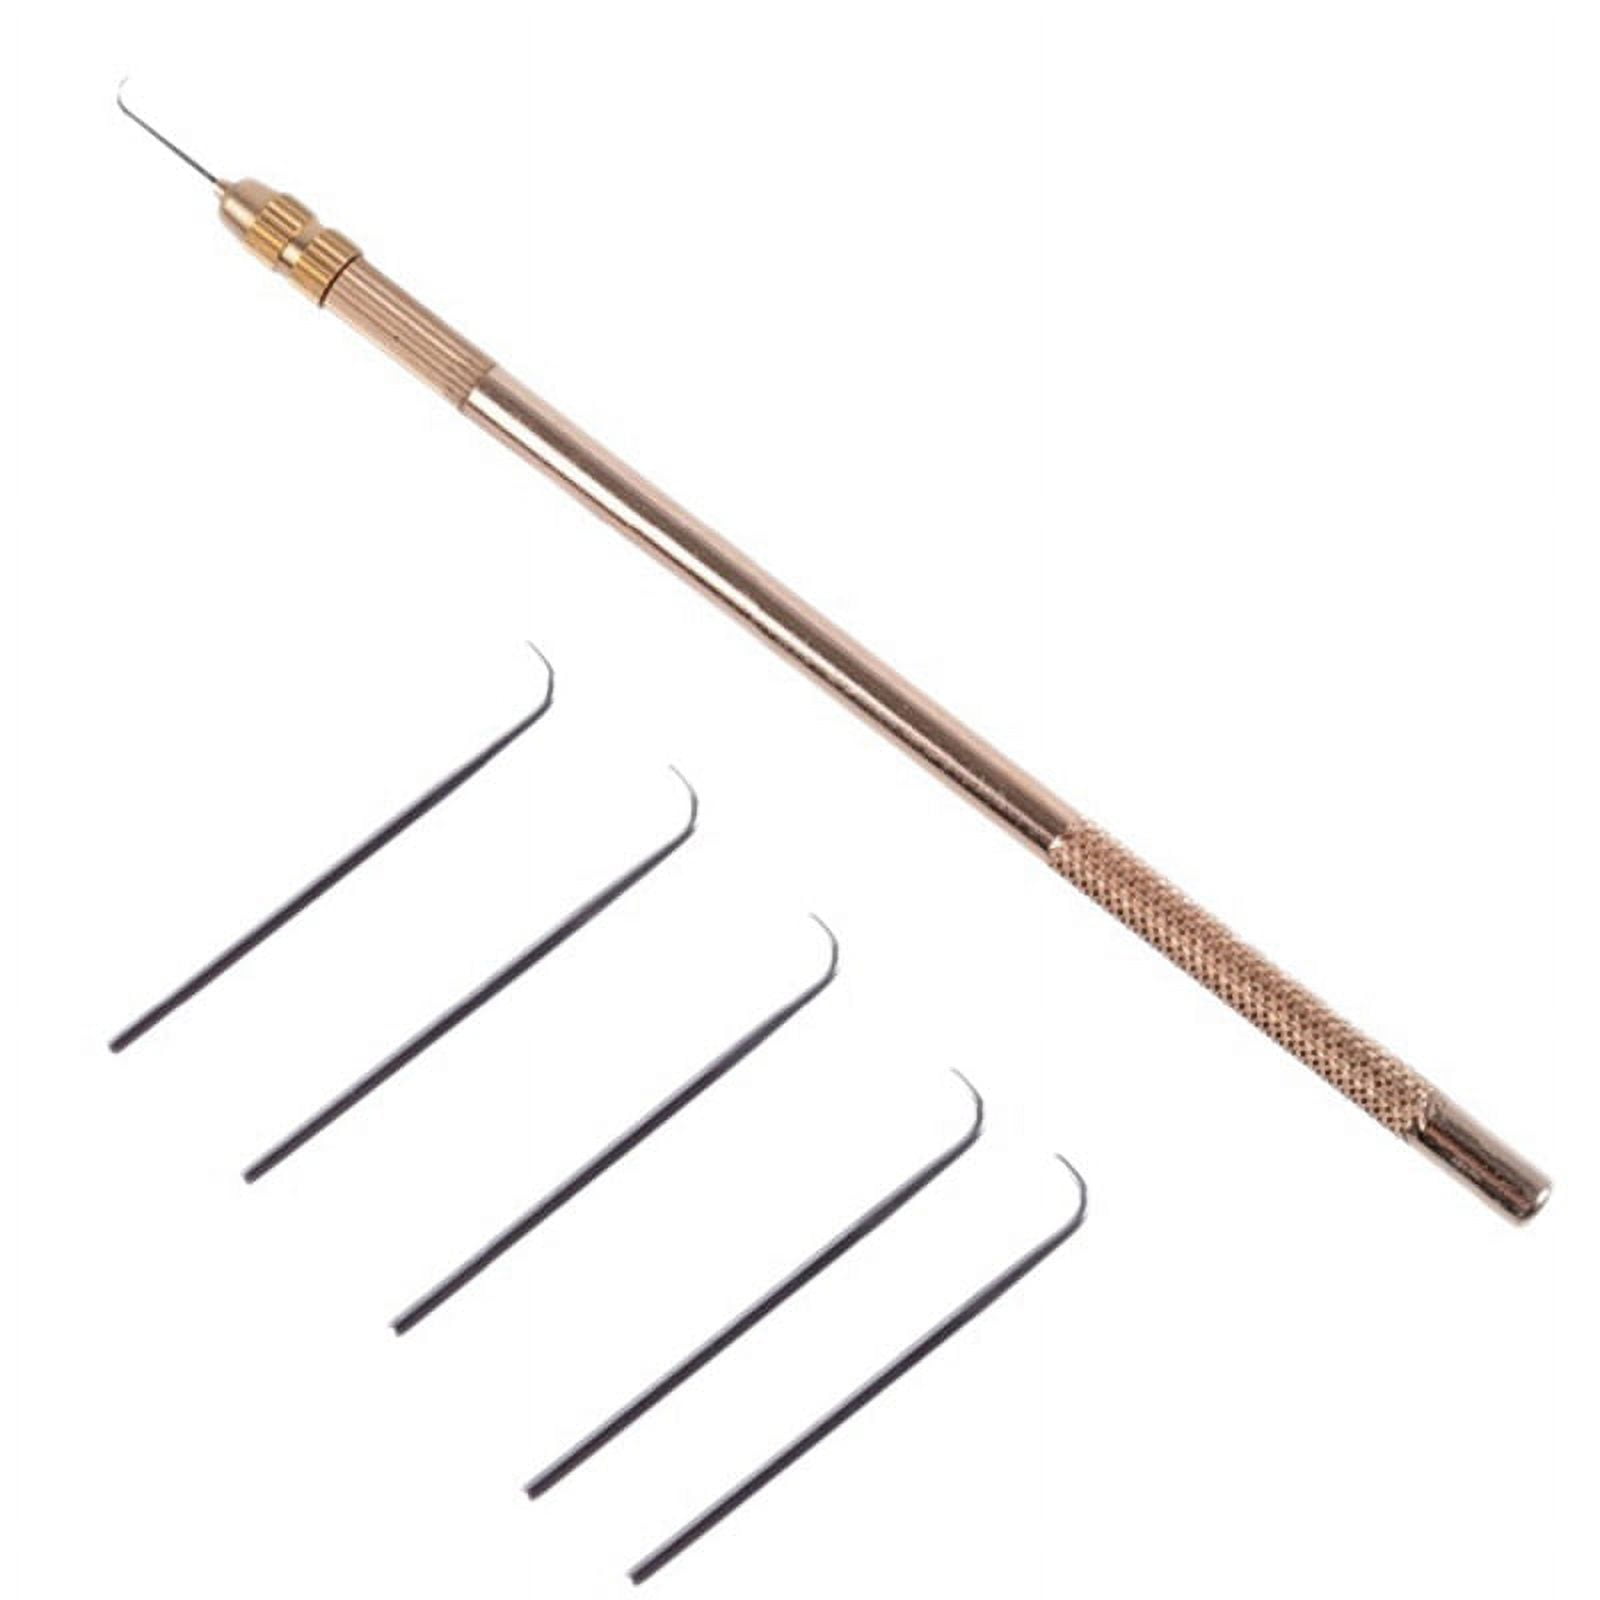 Wig Hair Ventilating Needles (Long or Short) - Which is Best For You?